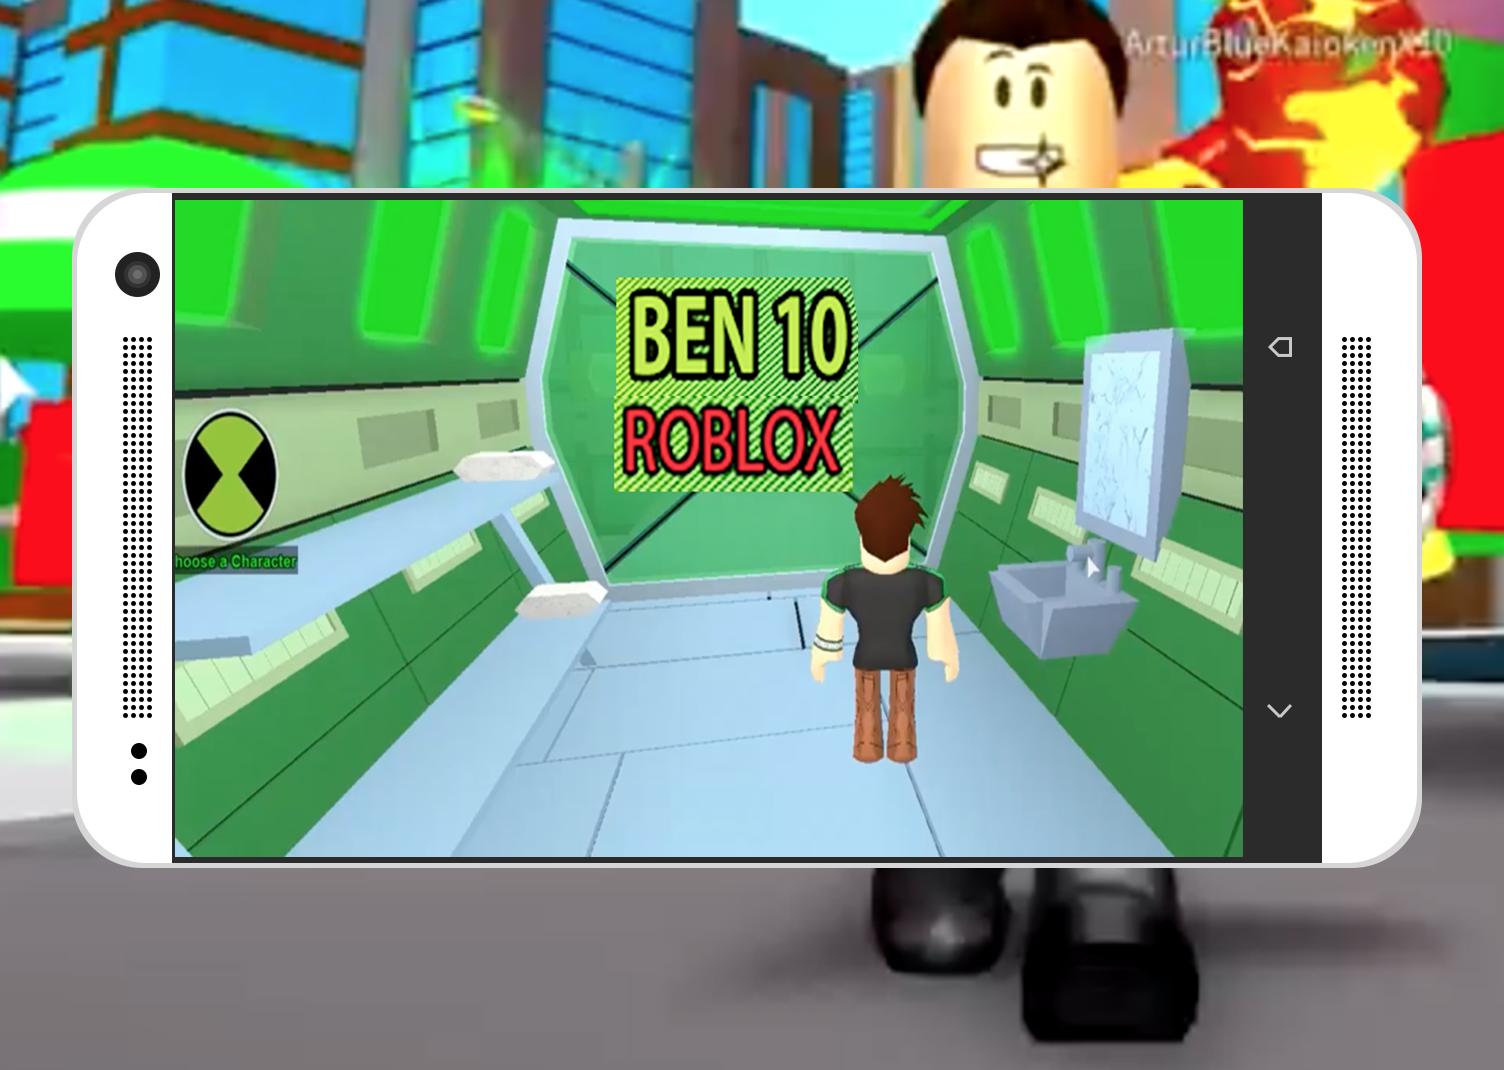 Guide For Ben 10 Evil Ben 10 Roblox For Android Apk Download - descargar guide for ben 10 evil ben 10 roblox 10 gratis